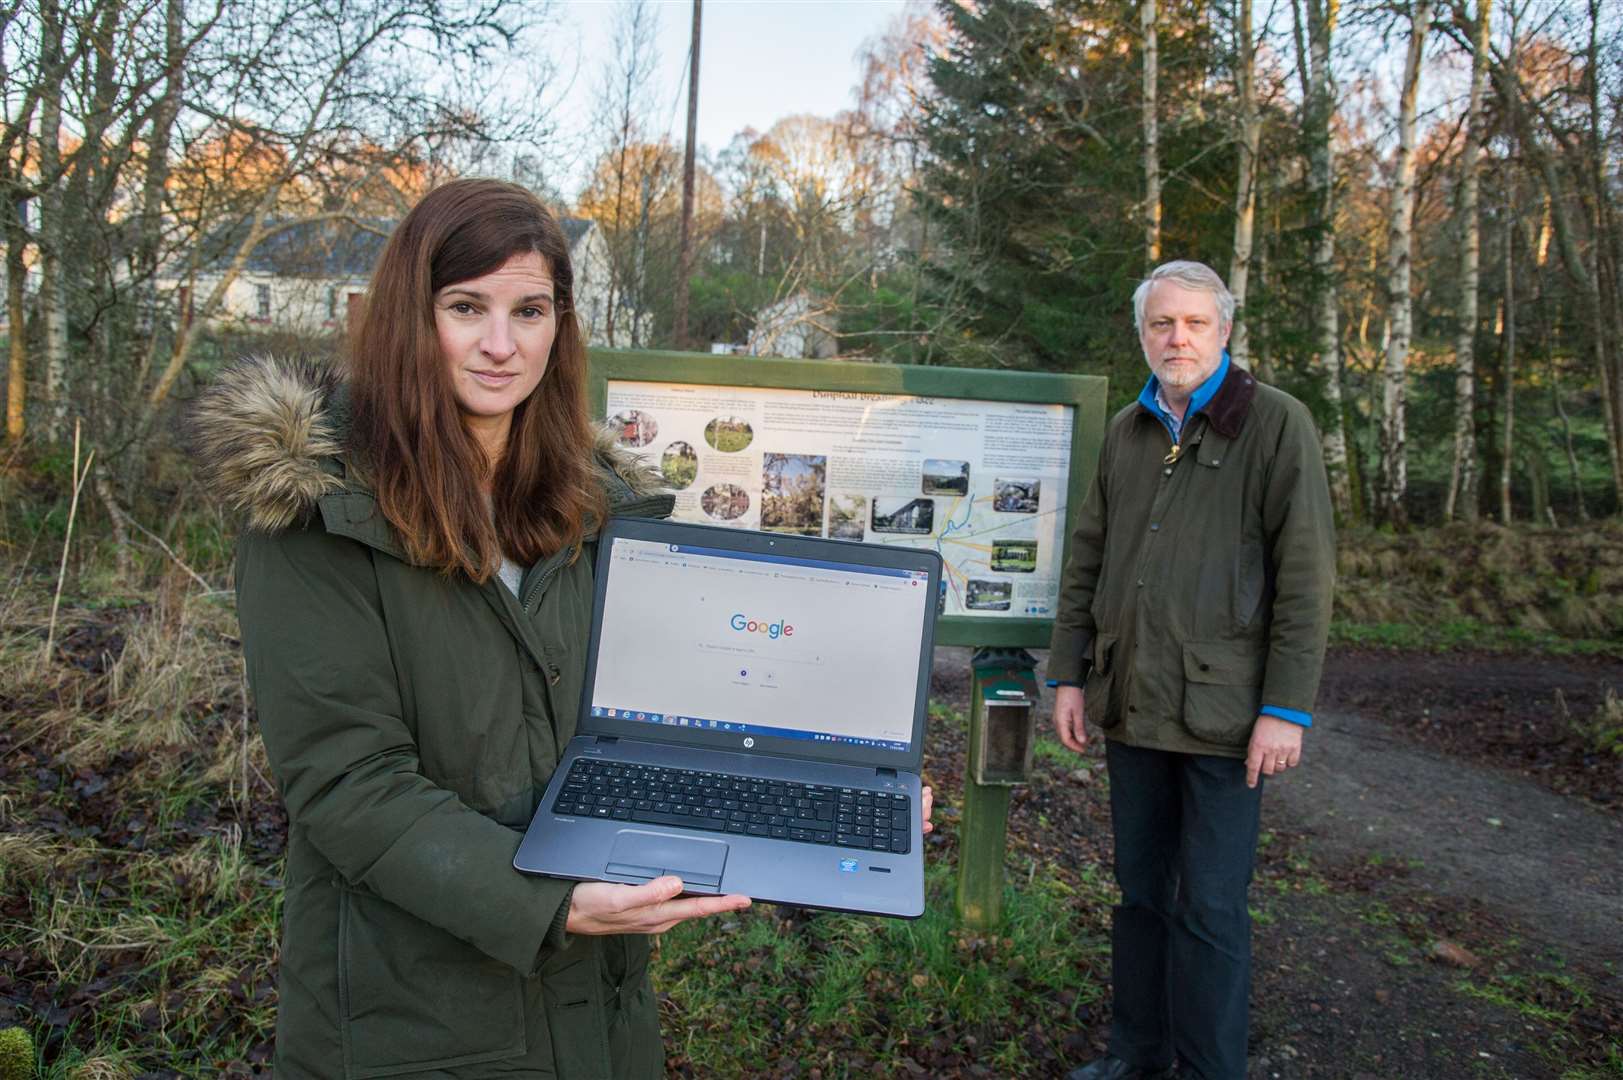 Finderne Development Trust directors Brian Higgs and Jo Laing are campaigning for better rural broadband.